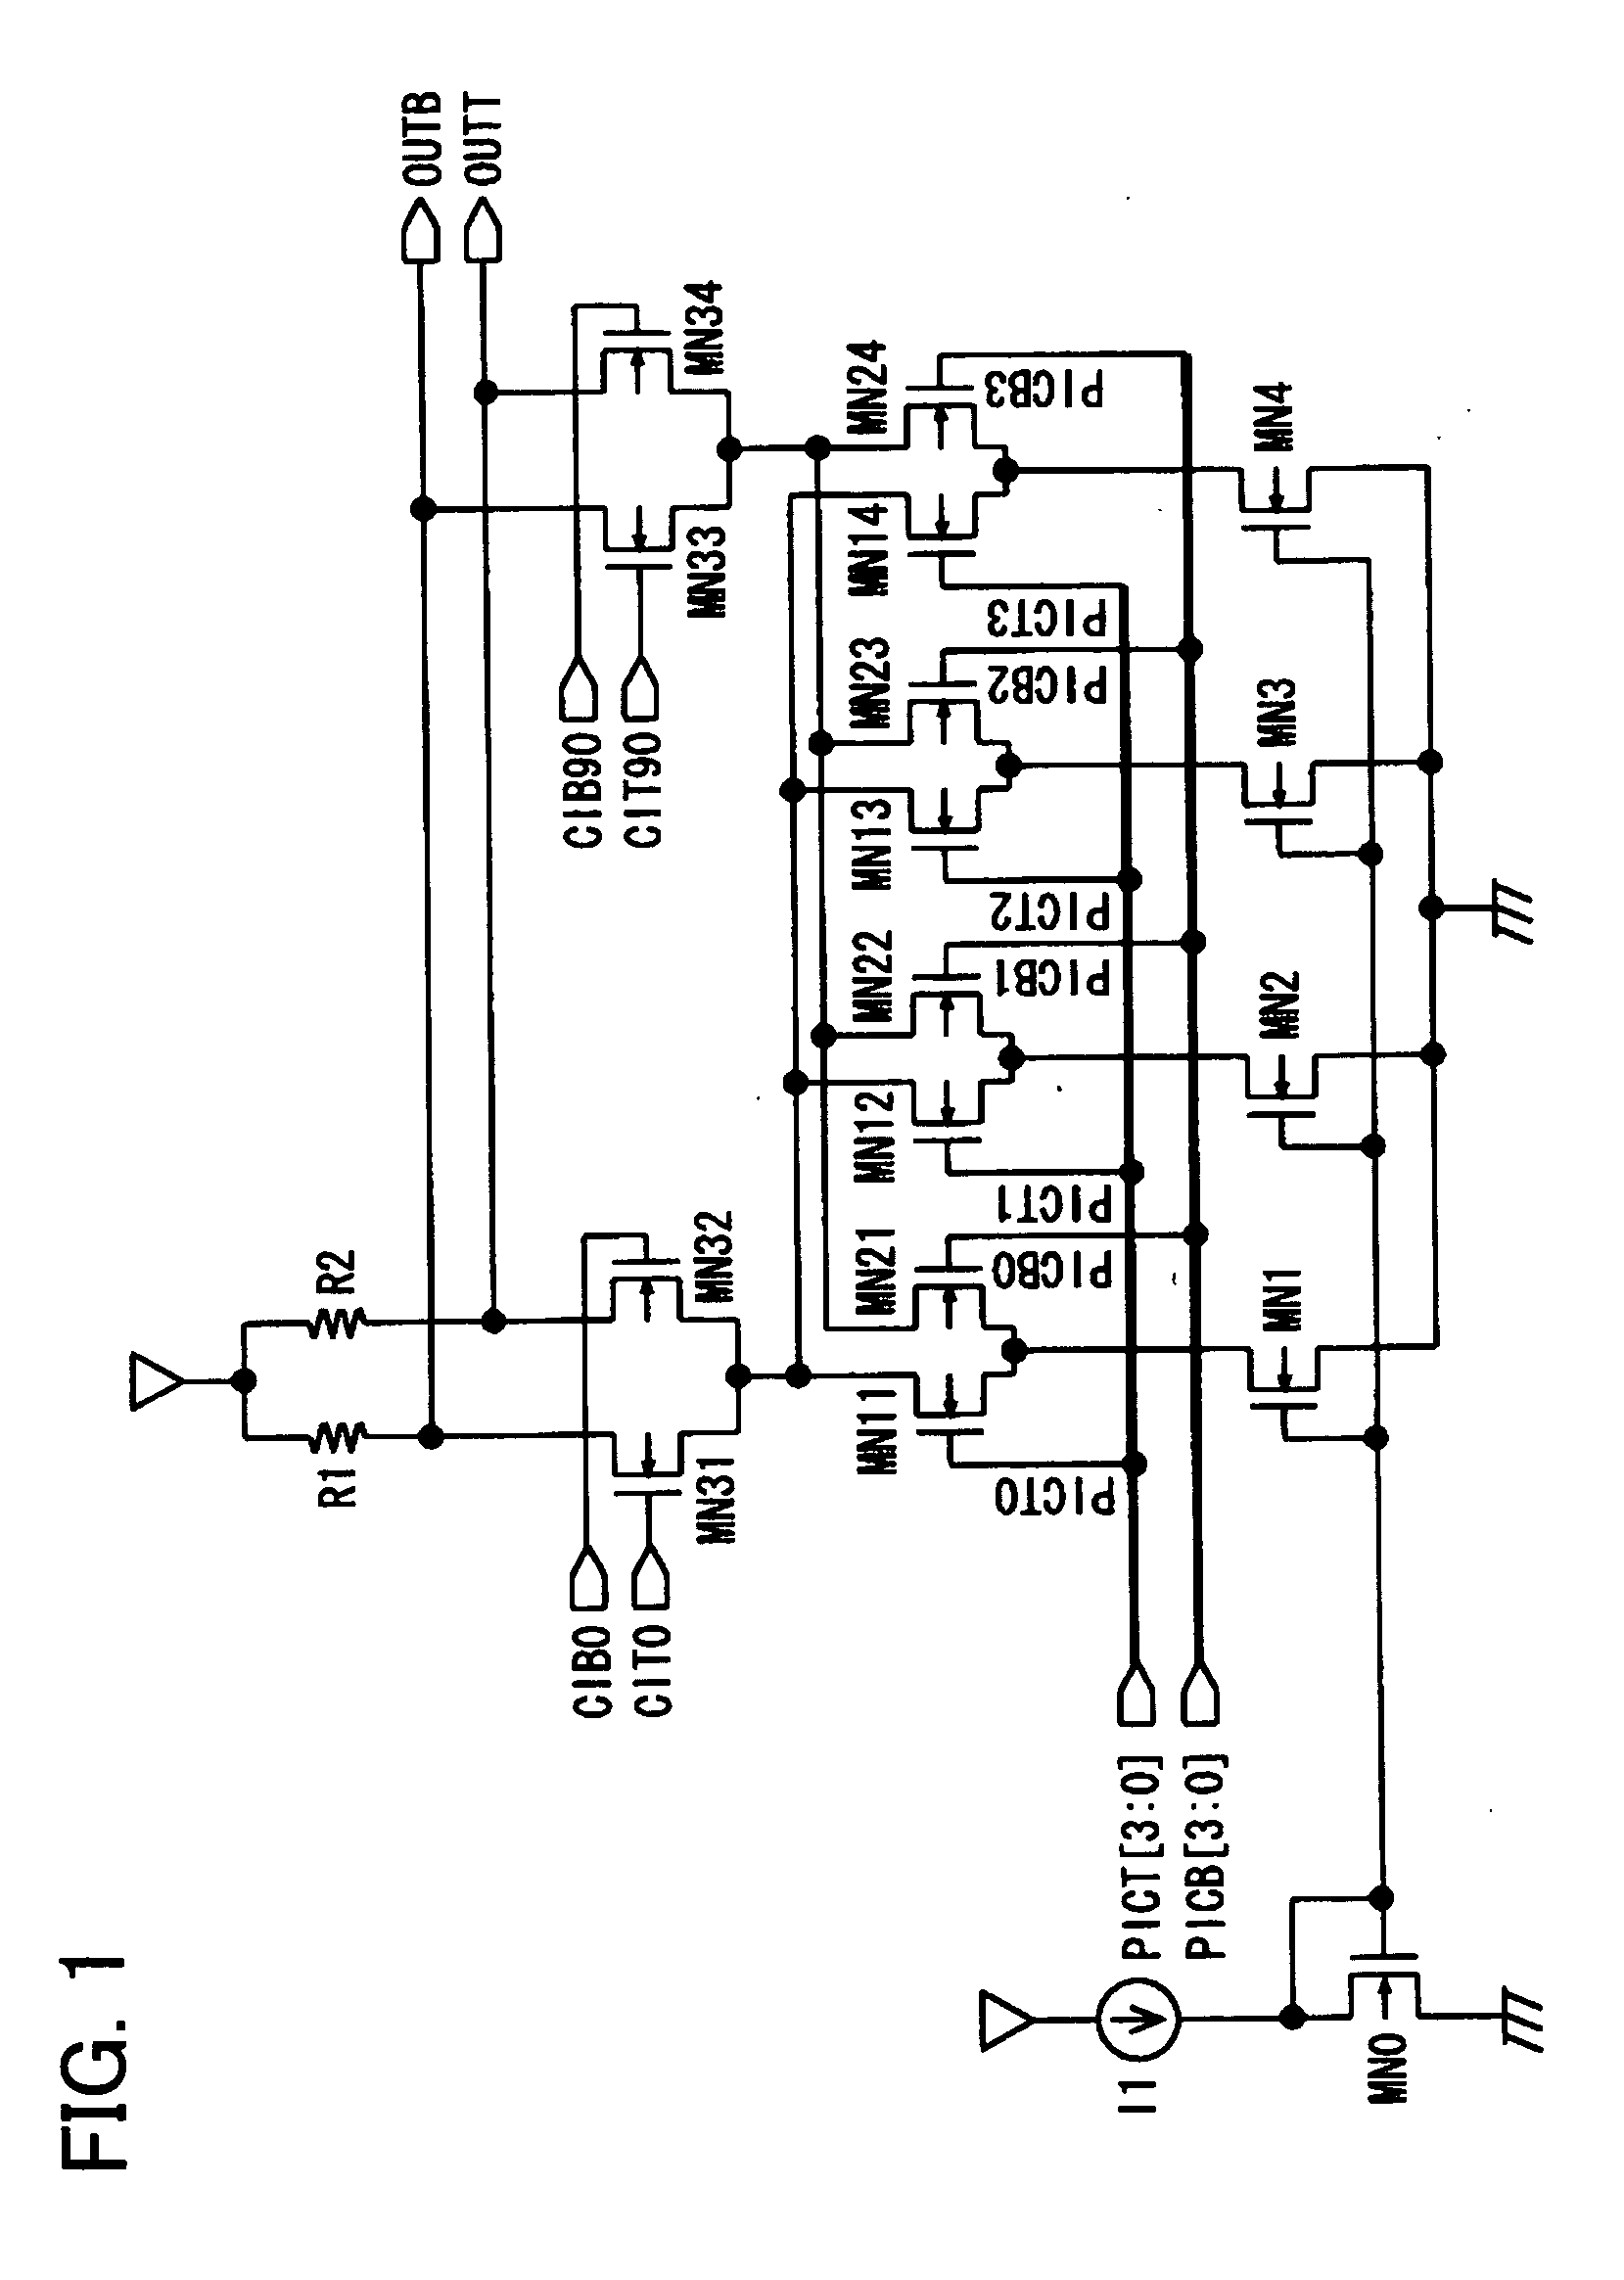 Semiconductor device and a method of testing the same